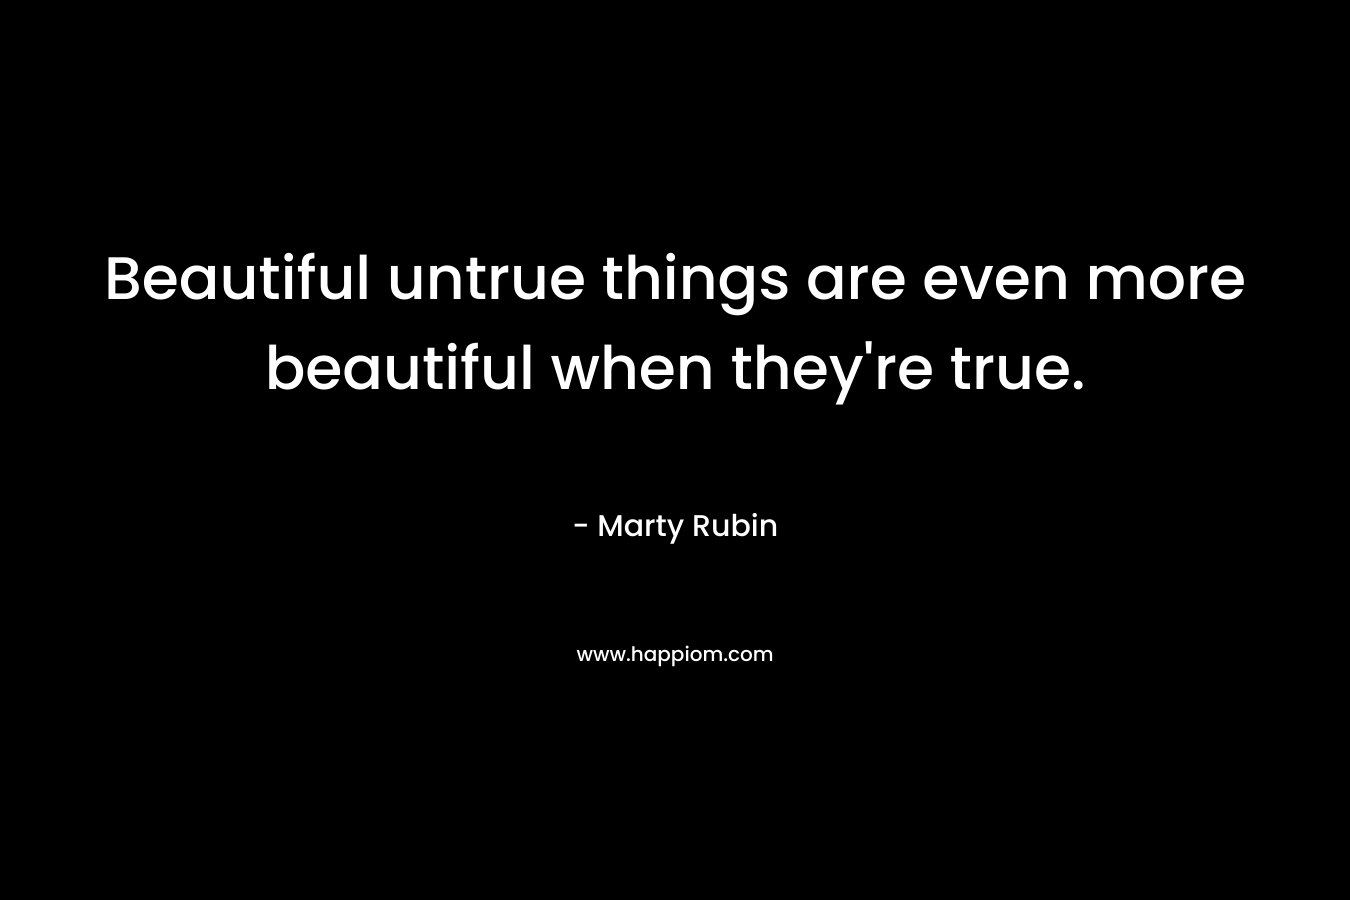 Beautiful untrue things are even more beautiful when they're true.